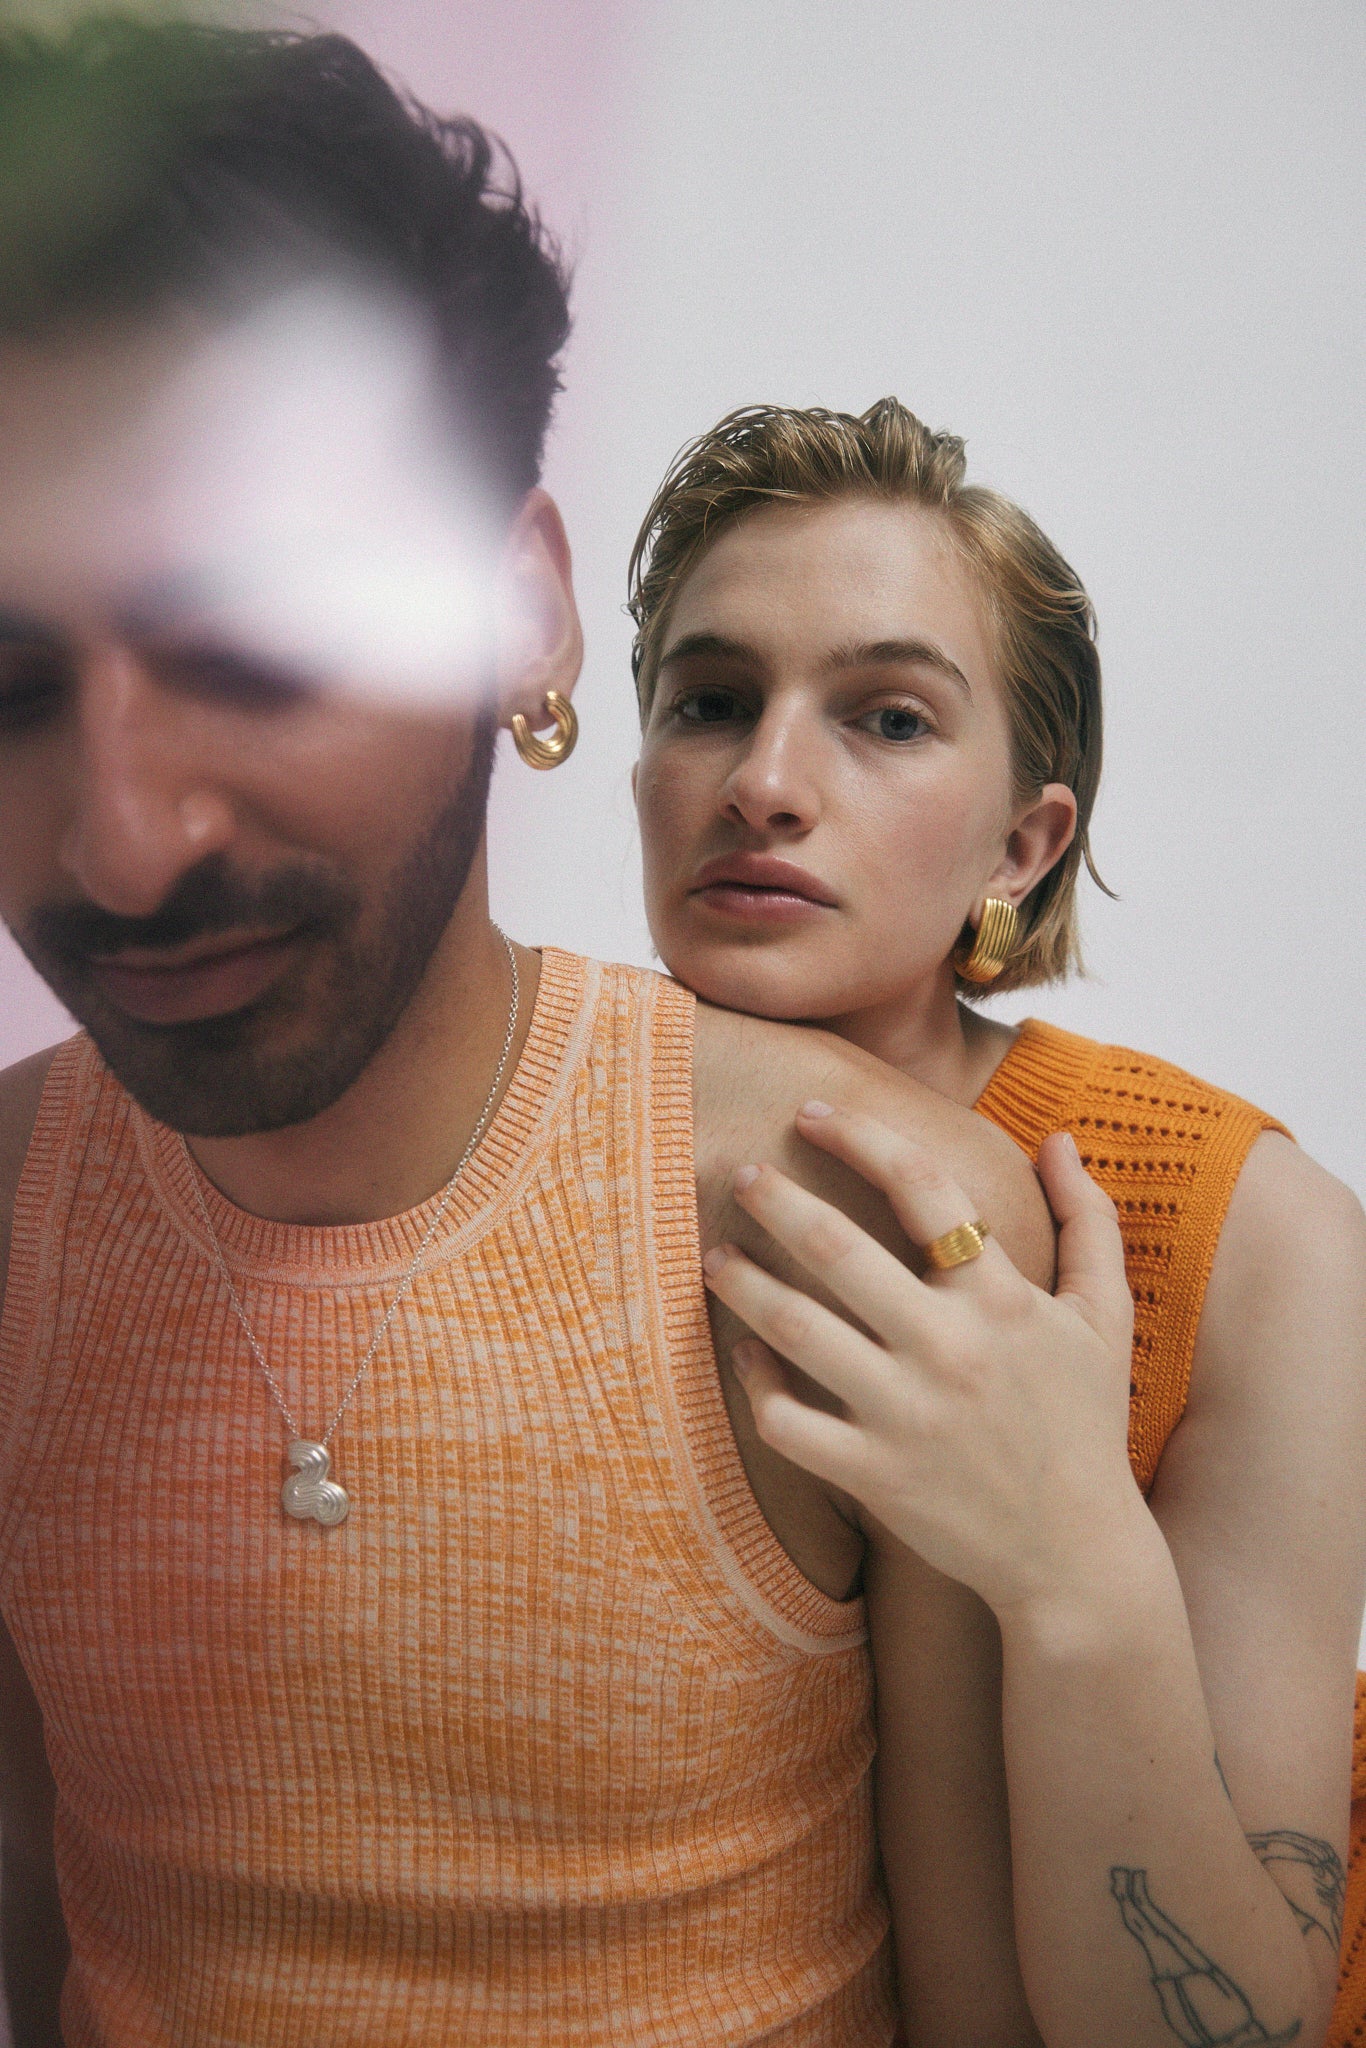 Man and woman in orange clothes, wearing jewelry